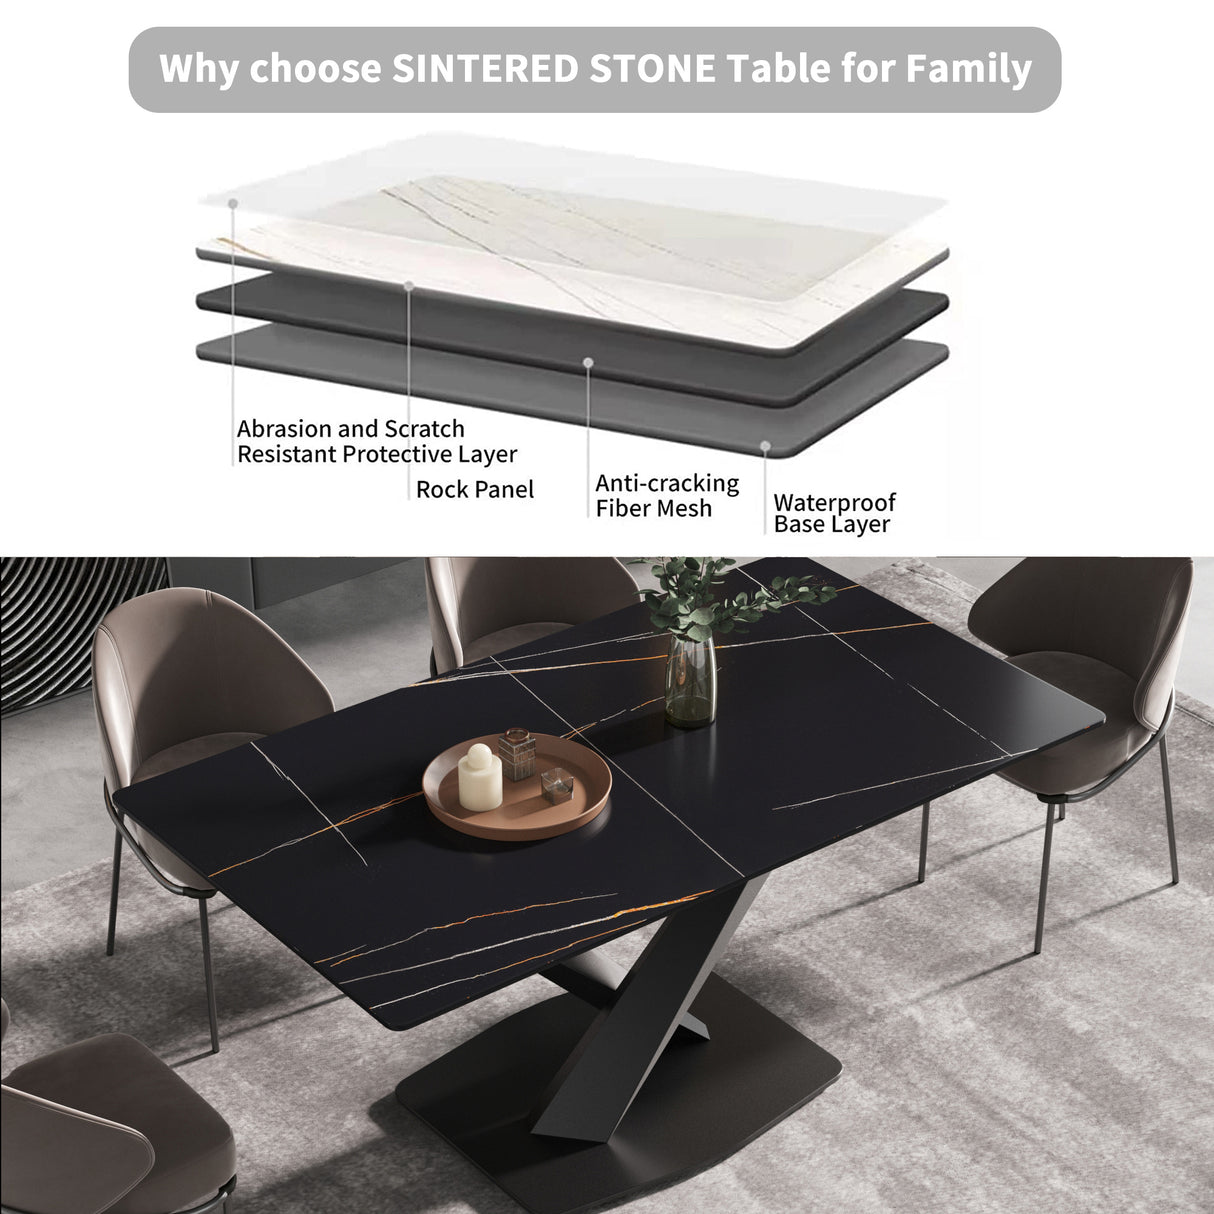 70.87" modern artificial stone black straight edge black metal leg dining table-can accommodate 6-8 people - Home Elegance USA